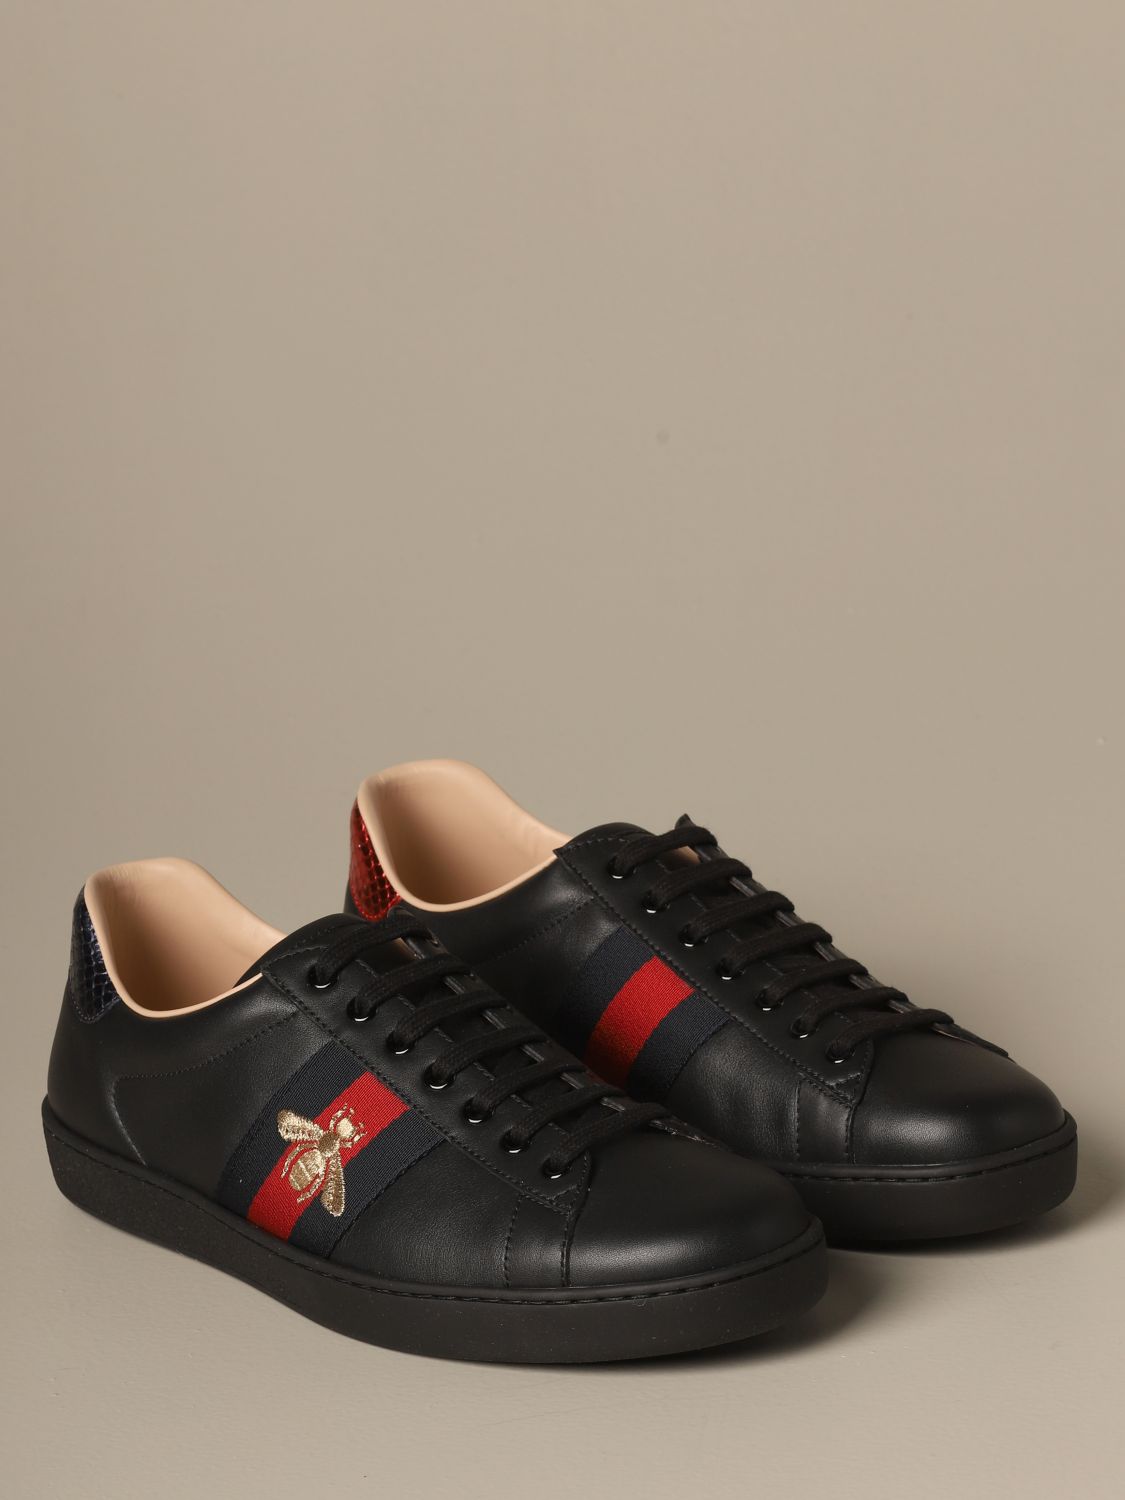 GUCCI: Ace leather sneakers with Web and bee bands | Sneakers Gucci Men ...